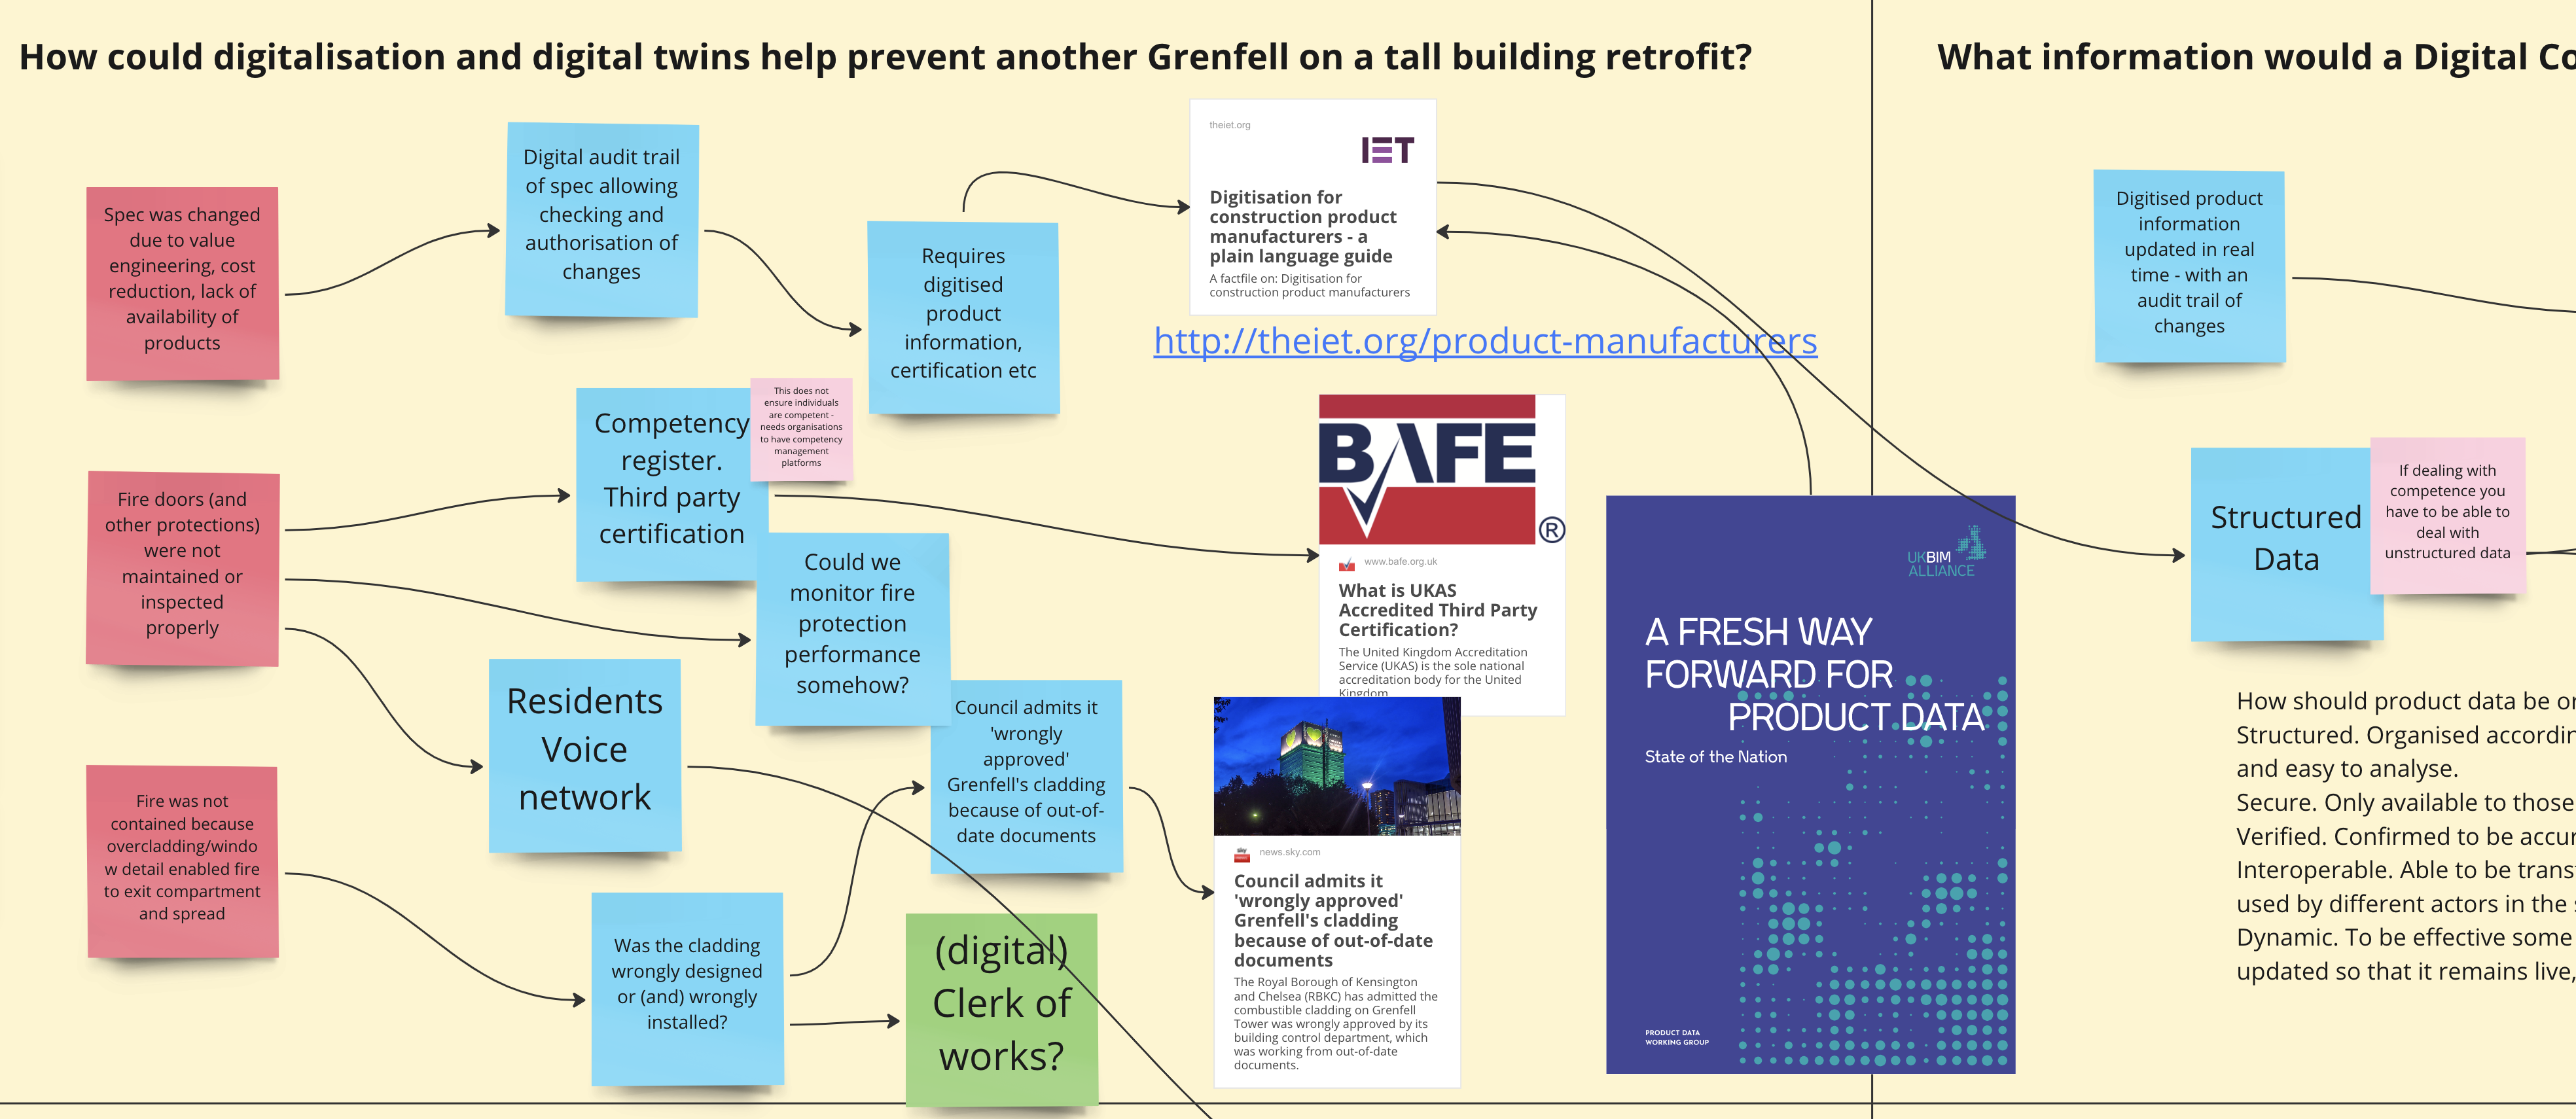 One exploration of the question about preventing another Grenfell tragedy